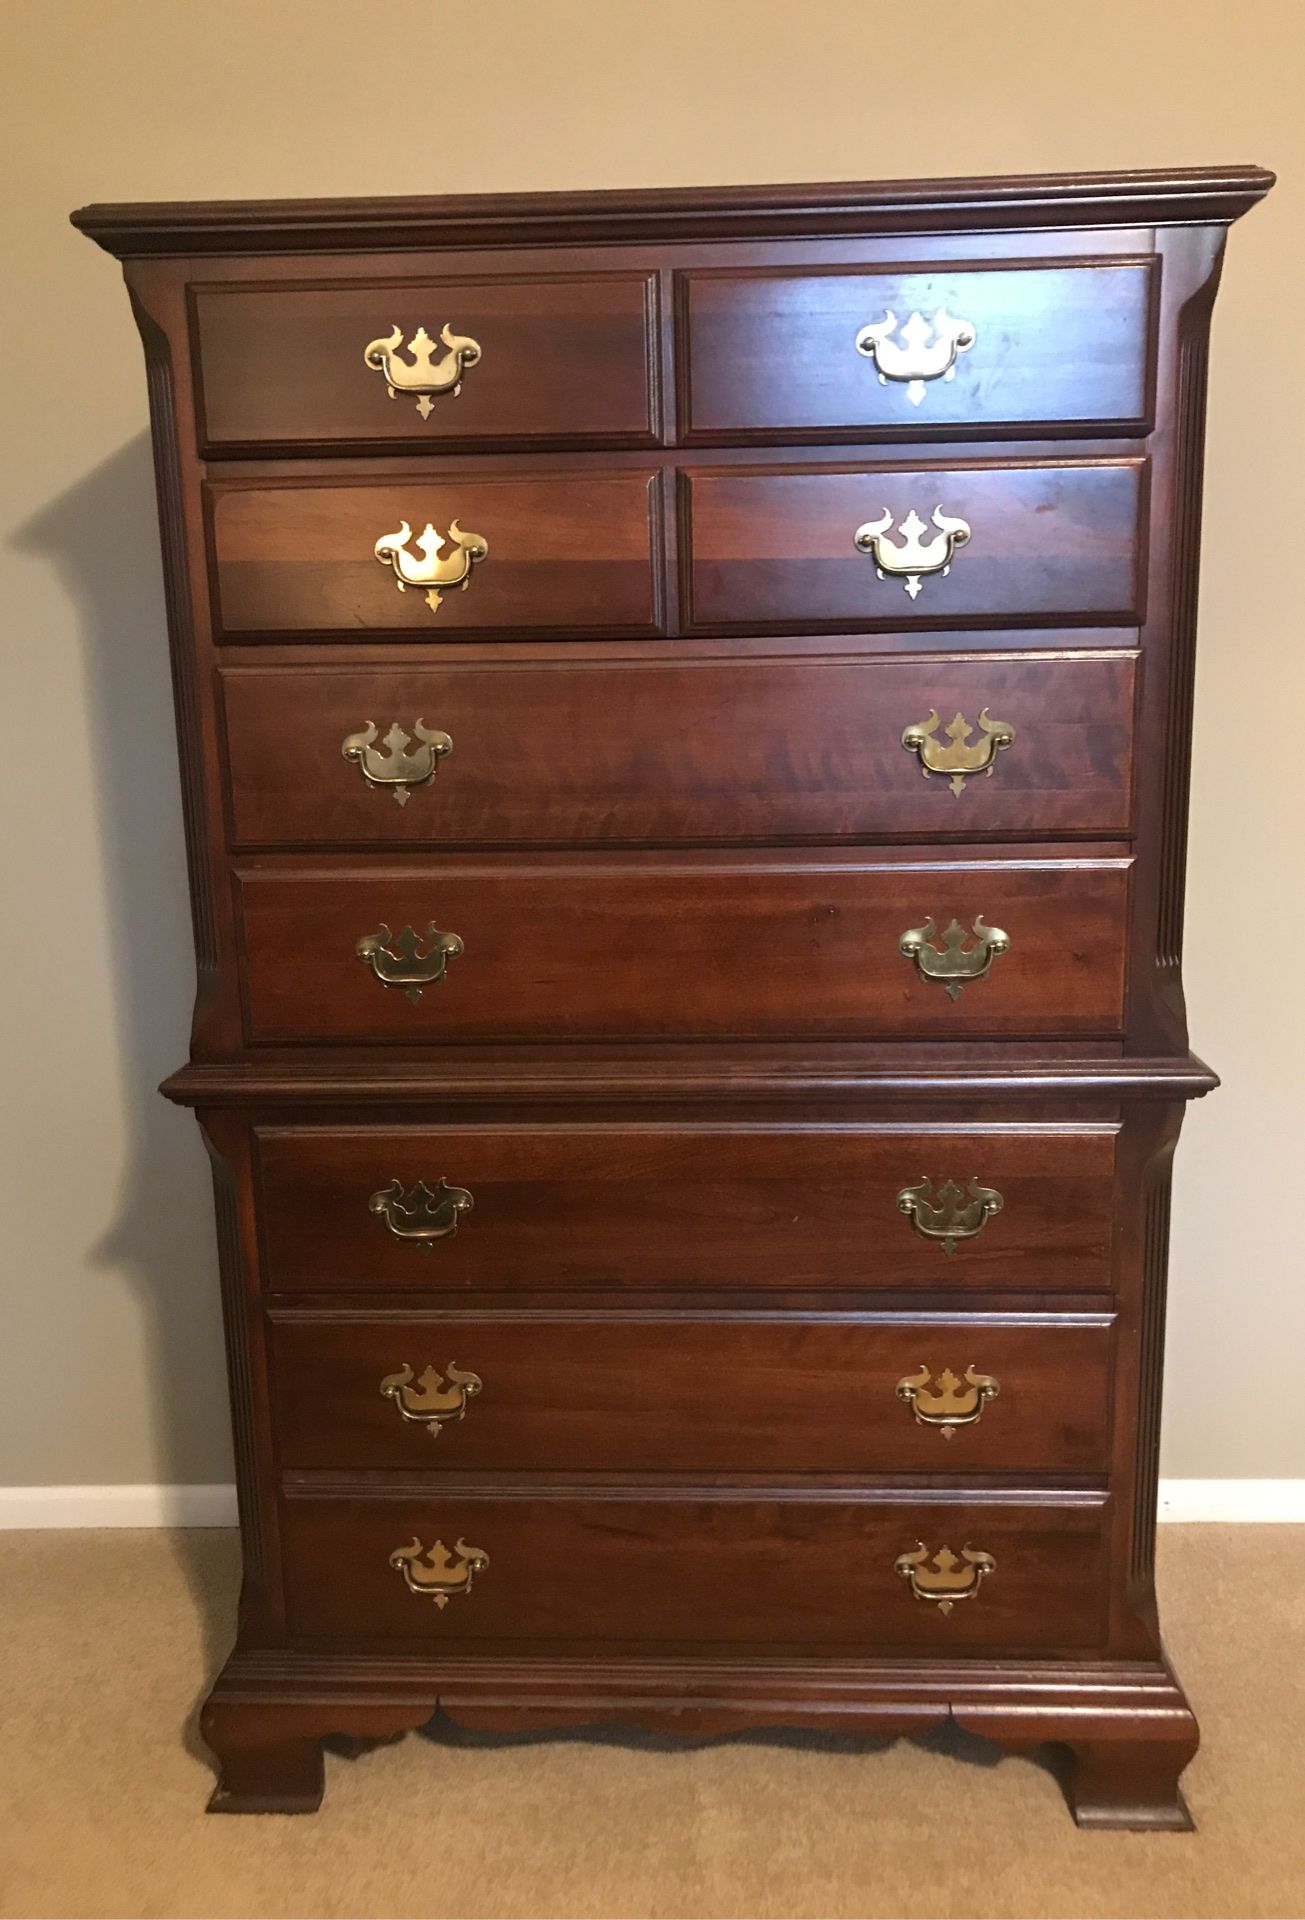 Beautiful cherry bedroom furniture set: moving and must sell!